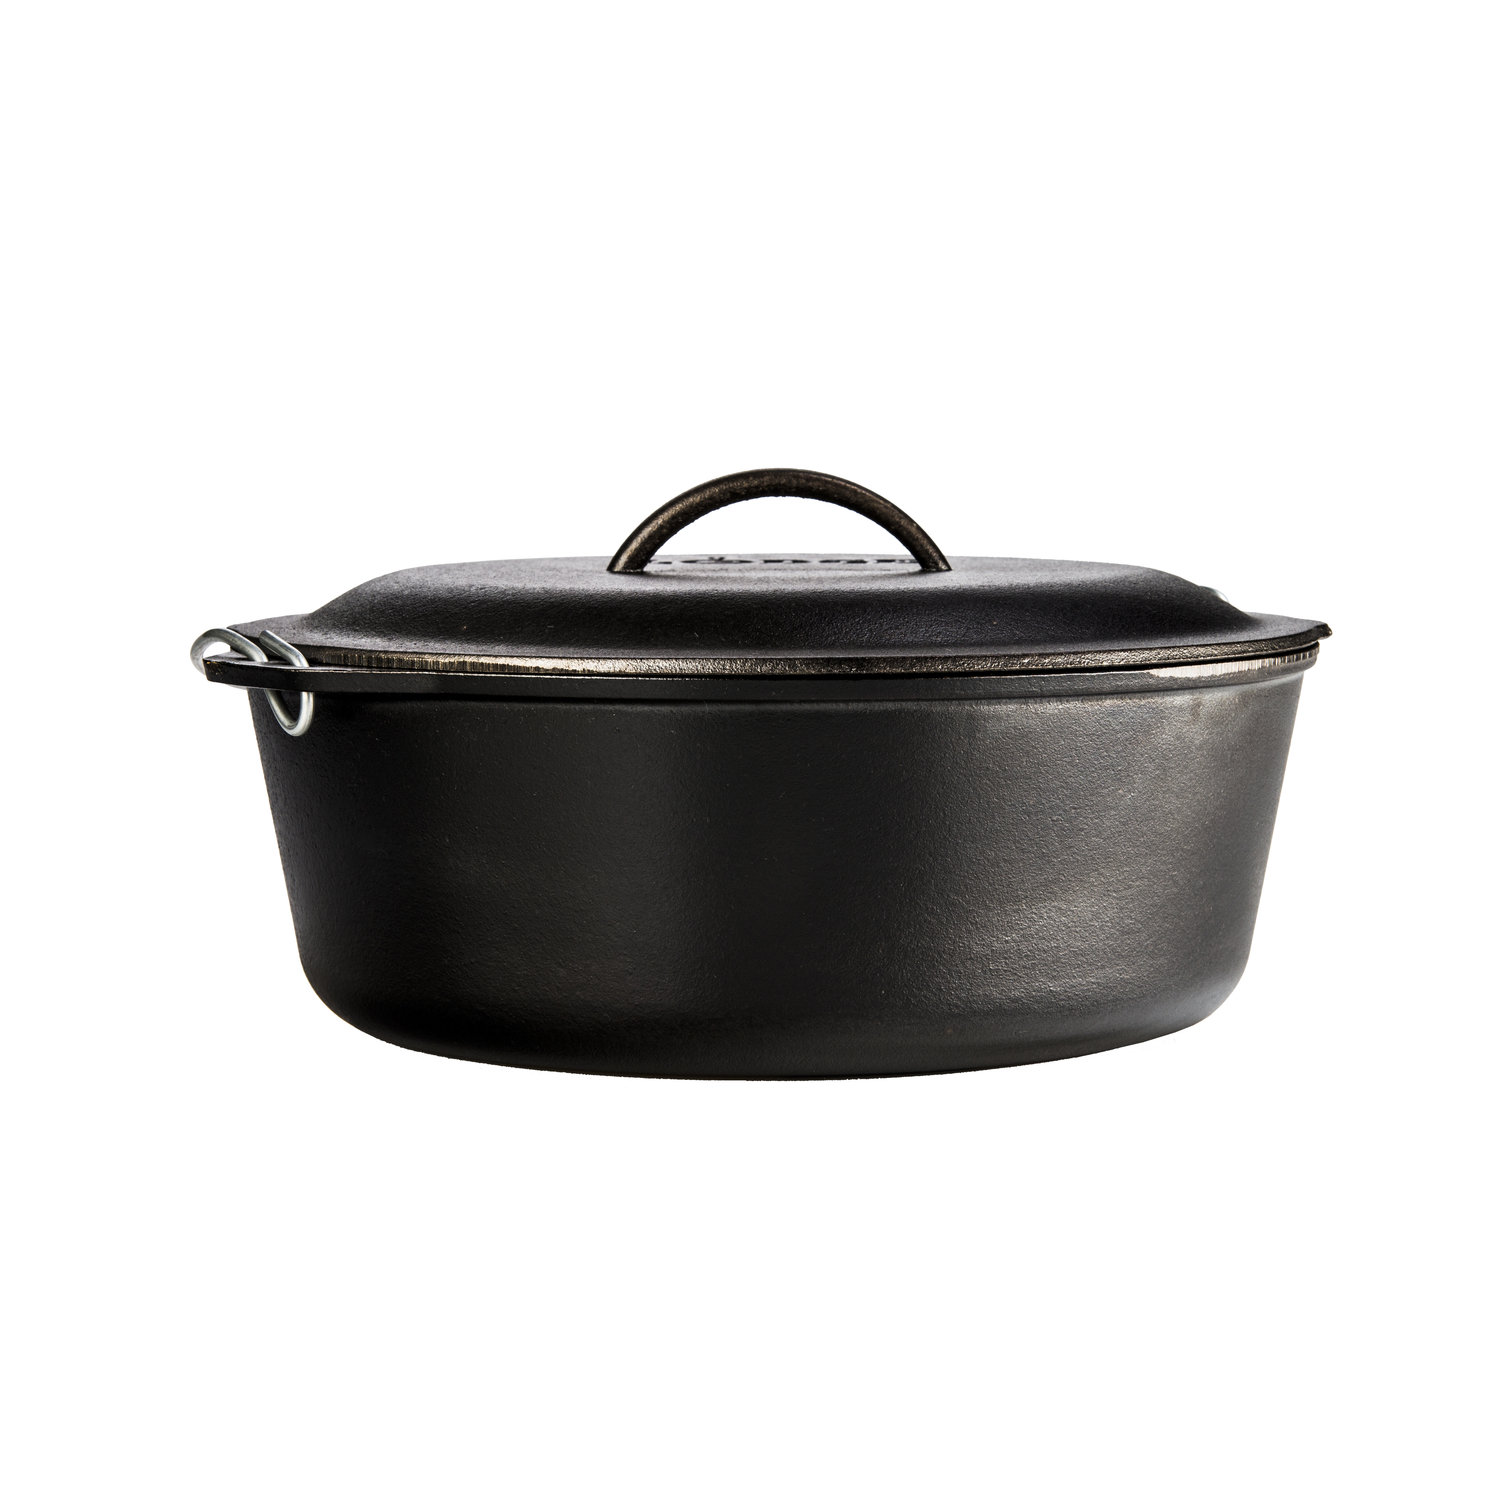 Lodge Cast Iron 5 Quart Cast Iron Dutch Oven with Bail Handle, Oven Safe, Black, Seasoned with Natural Oil